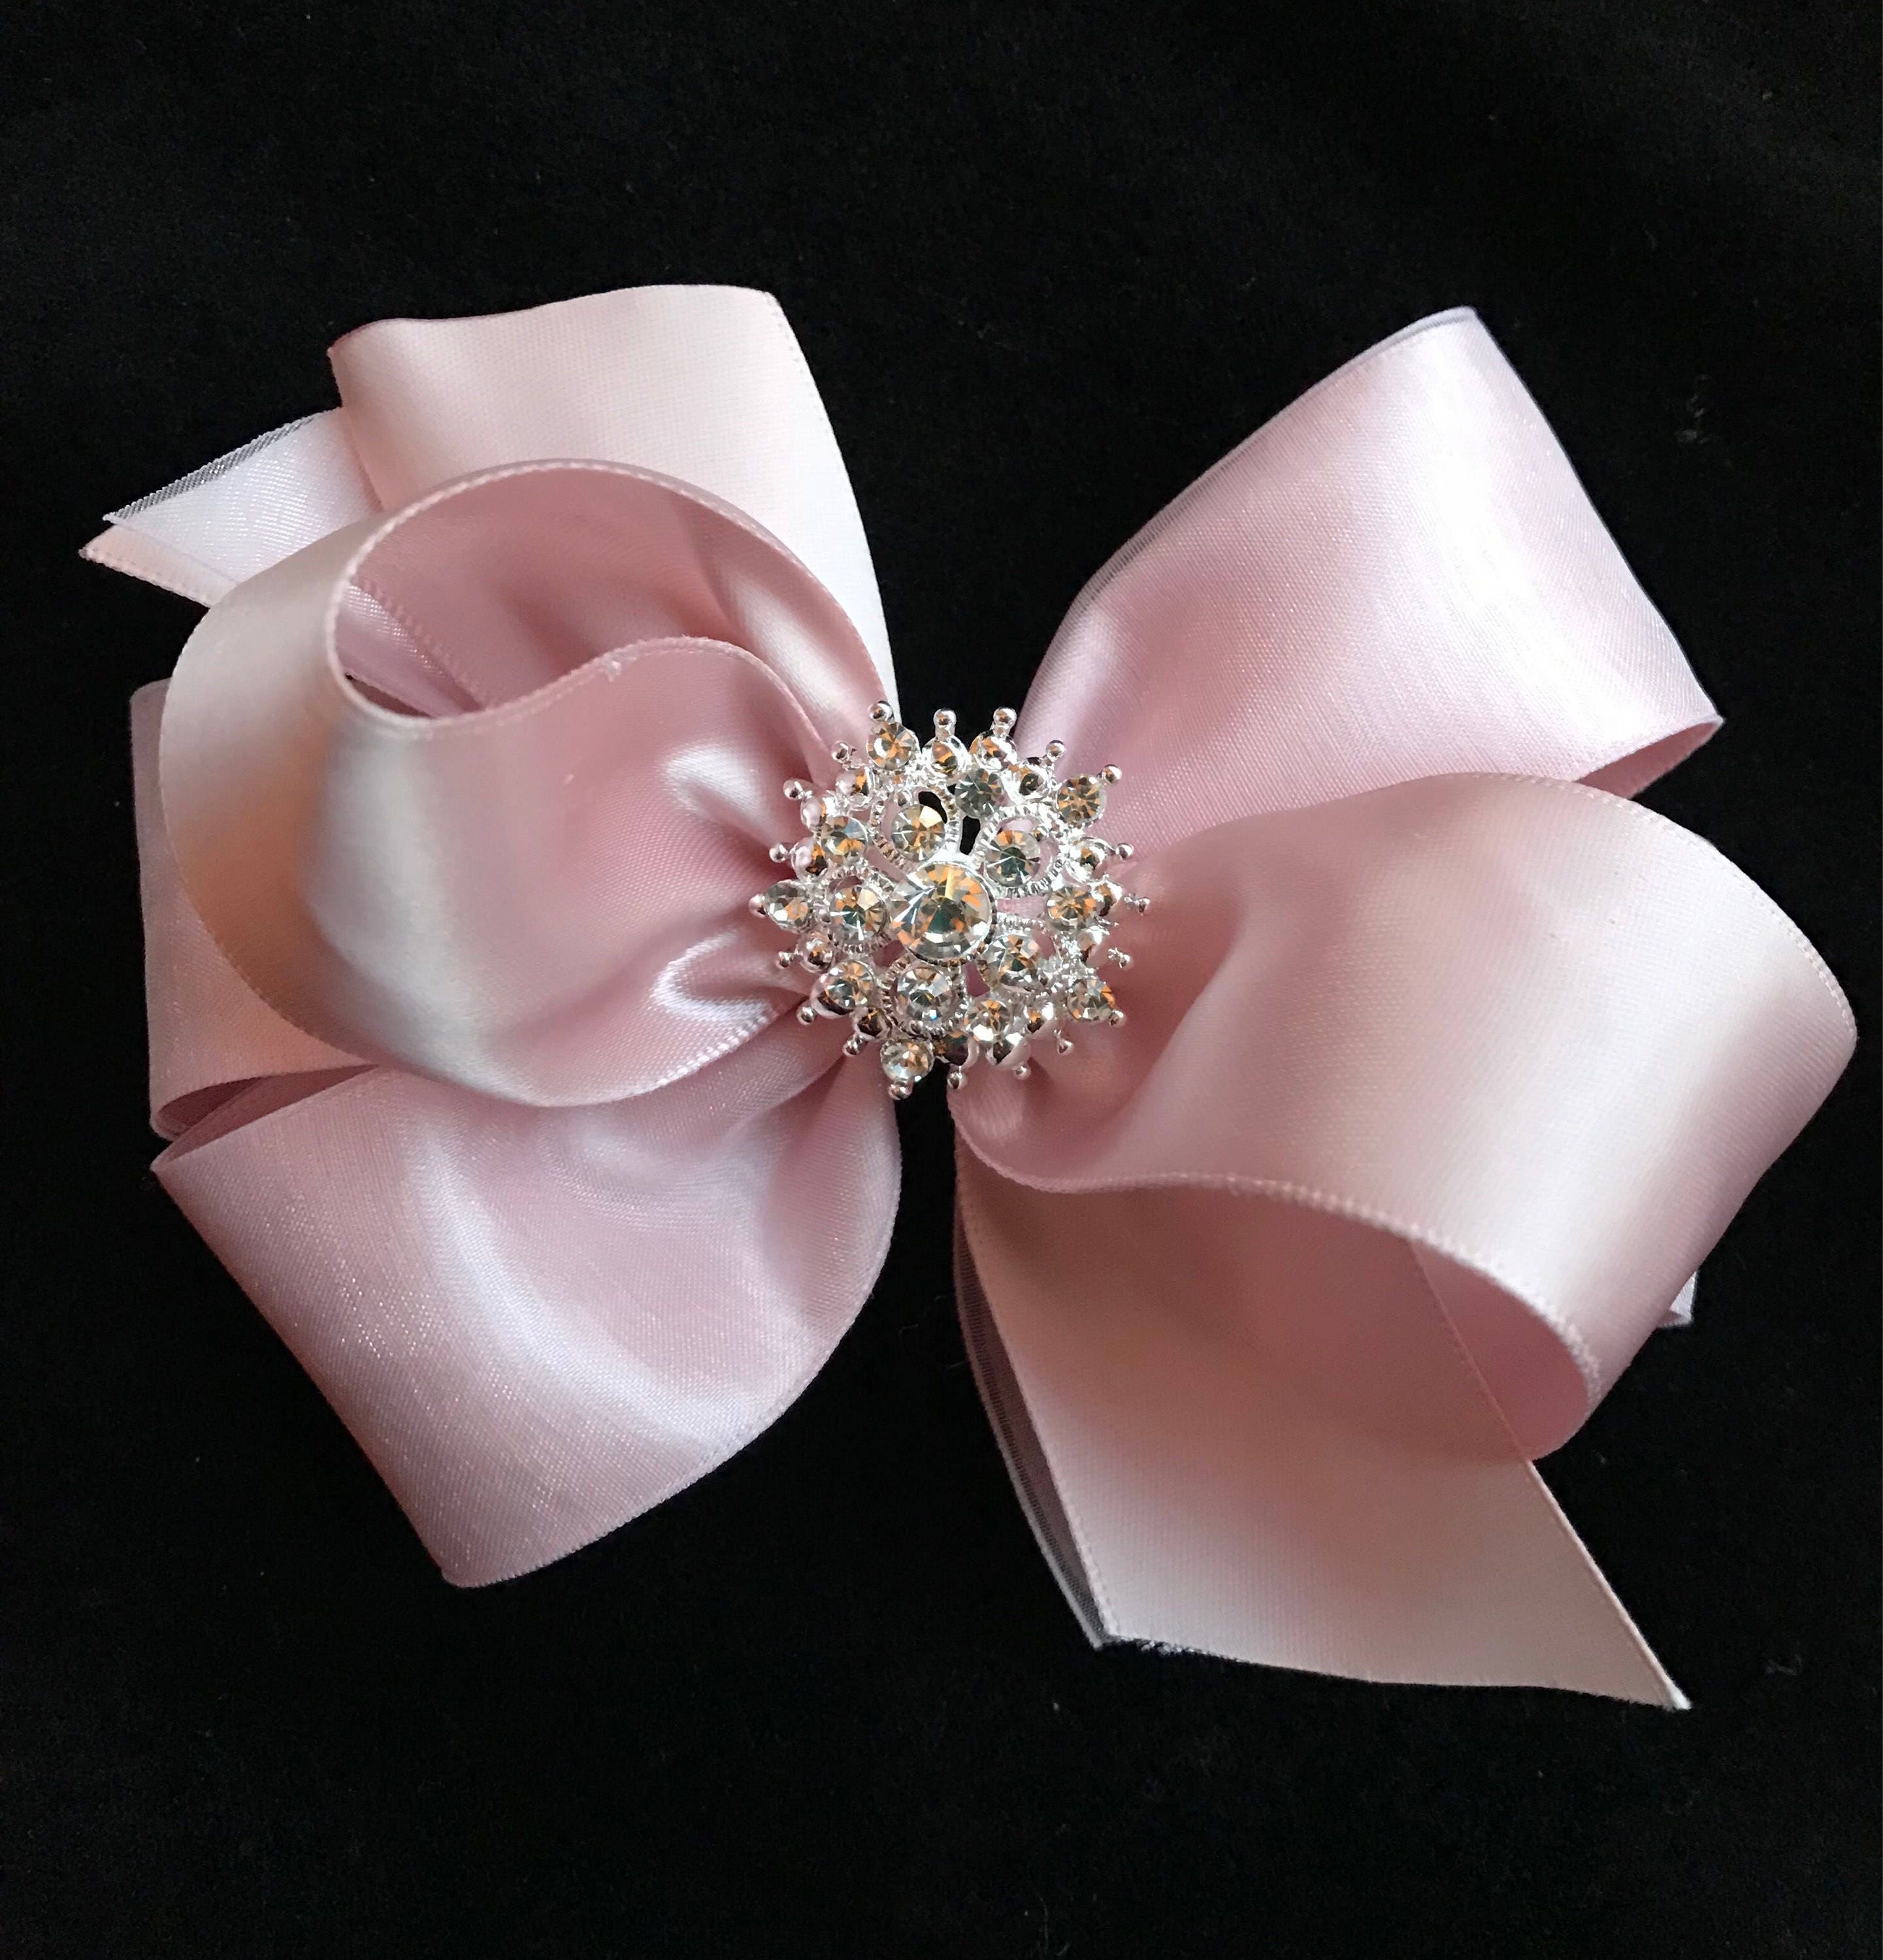 Satin And Pearl Bow Hair Clip In Dusky Pink, Olivia Divine Jewellery